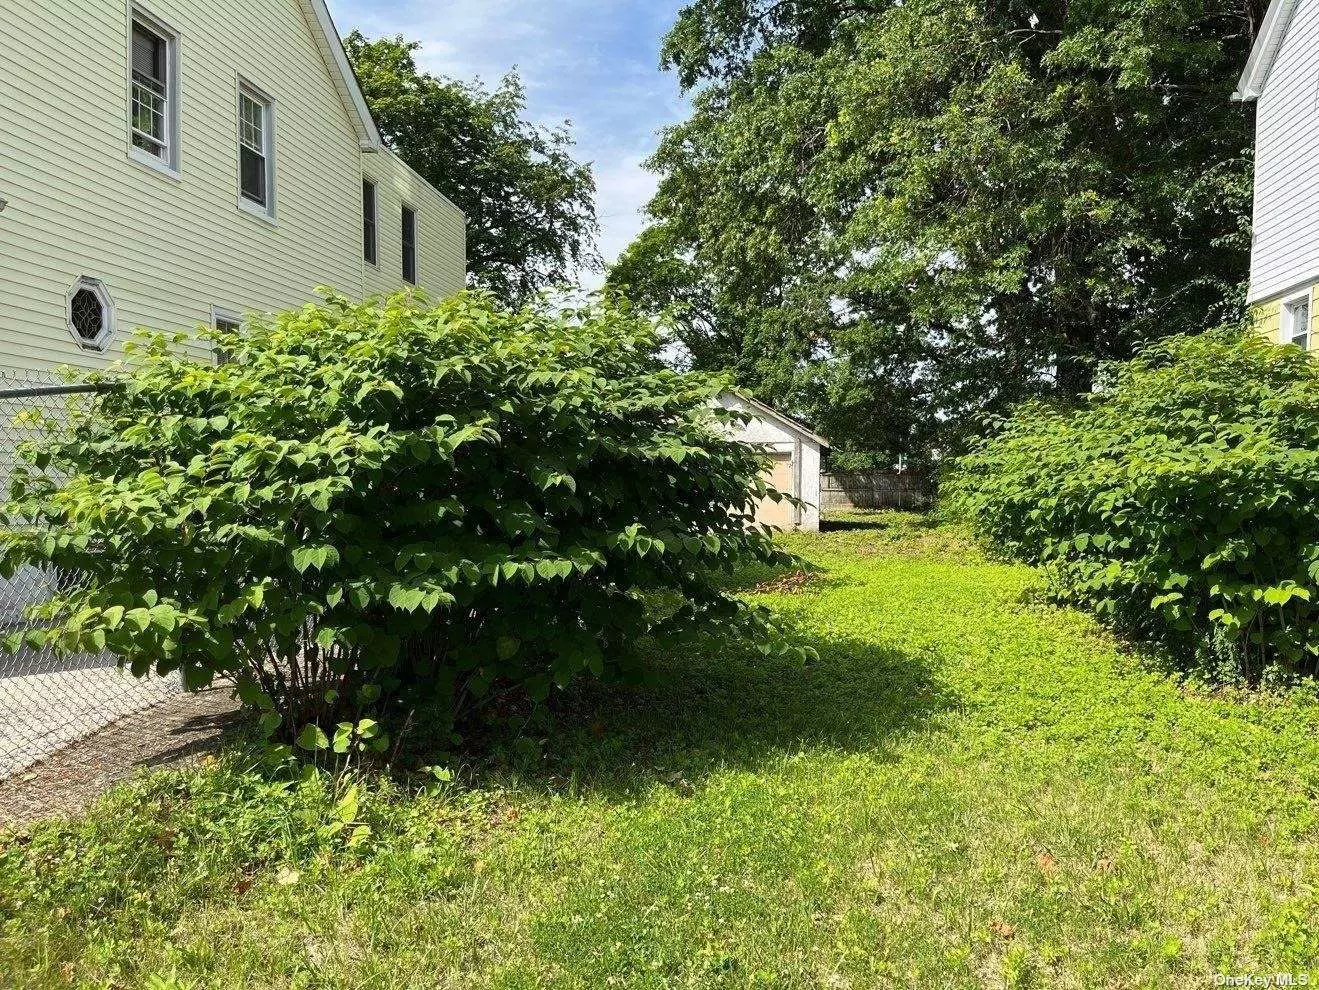 Vacant lot w/ garage, 32x157 lot size, in residential setting. Perfect for investor/builder or home owner looking to build their dream home. Don&rsquo;t miss out on this opportunity!